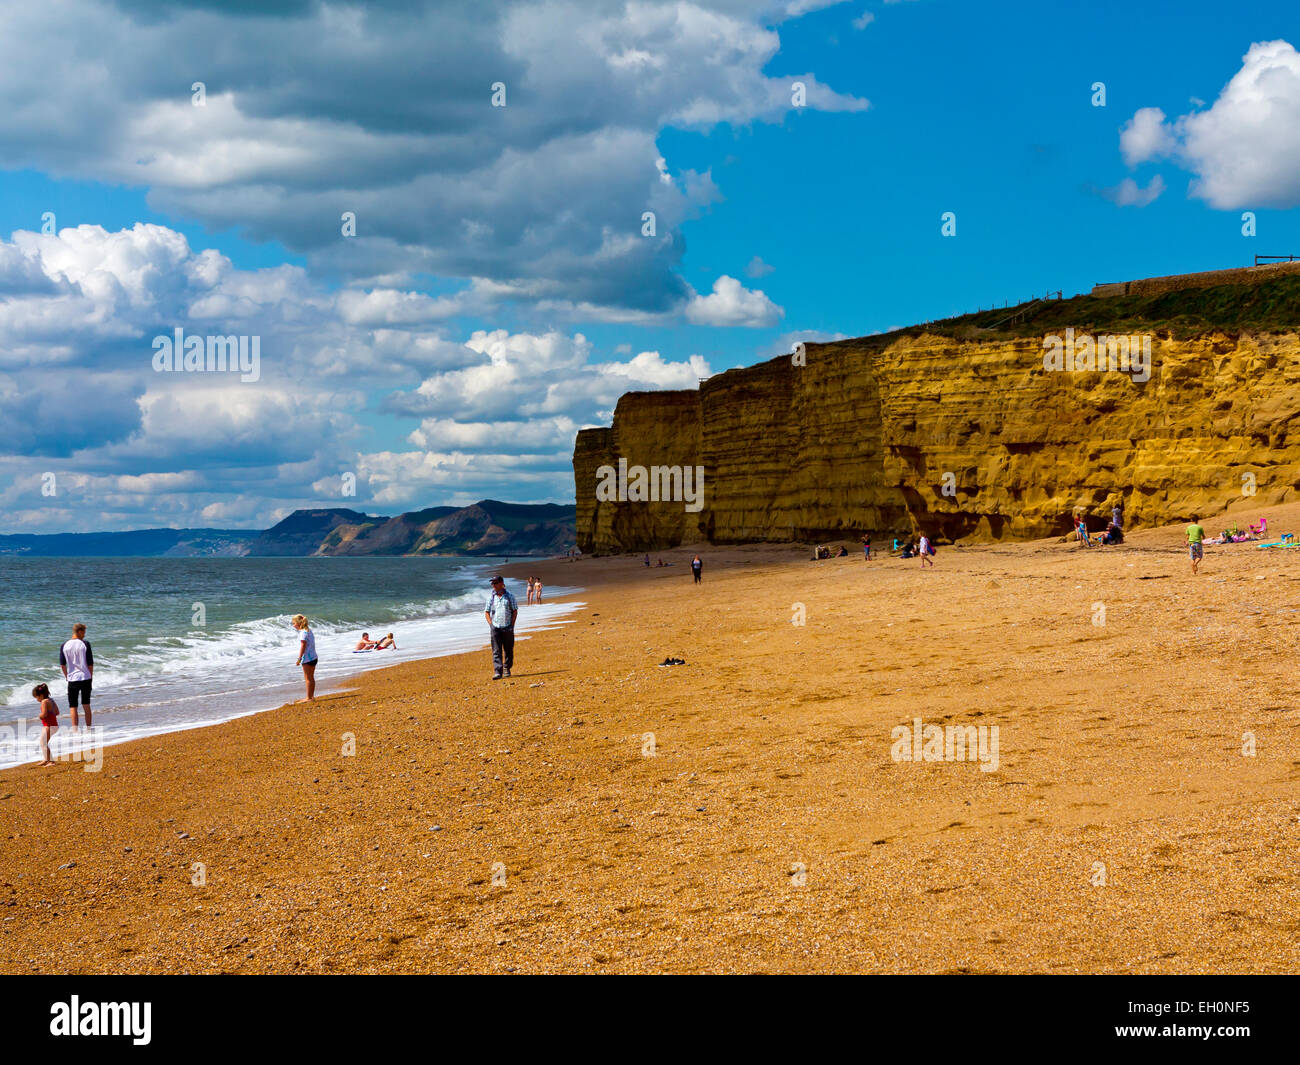 People playing on the beach with sandstone cliffs behind at Burton Bradstock on the Jurassic Coast south west England UK Stock Photo